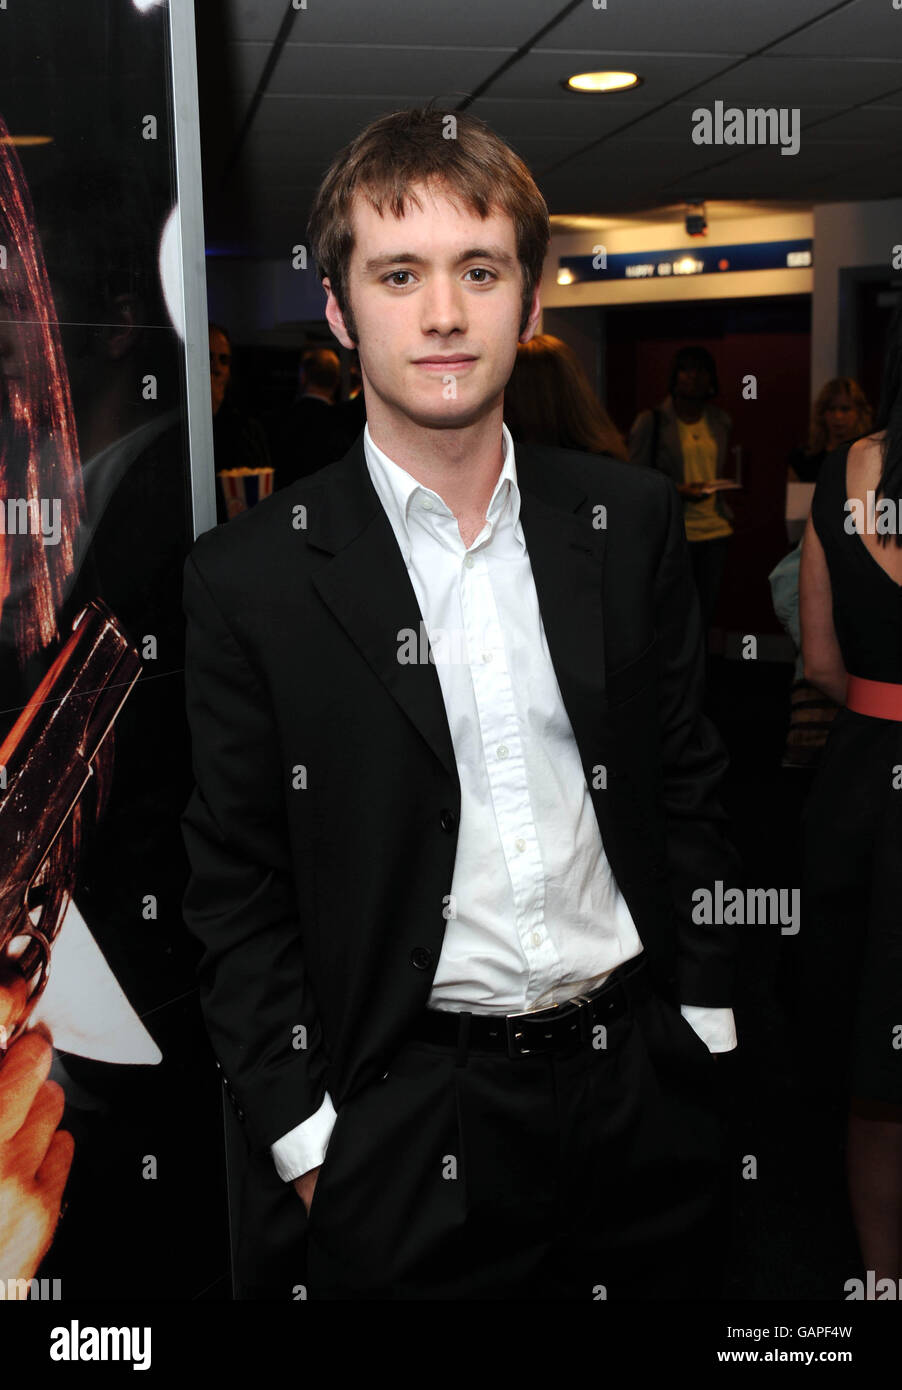 Sean Biggerstaff arrives for the VIP Screening of Cashback, directed by Sean Ellis, at the Odeon Covent Garden in central London. Stock Photo